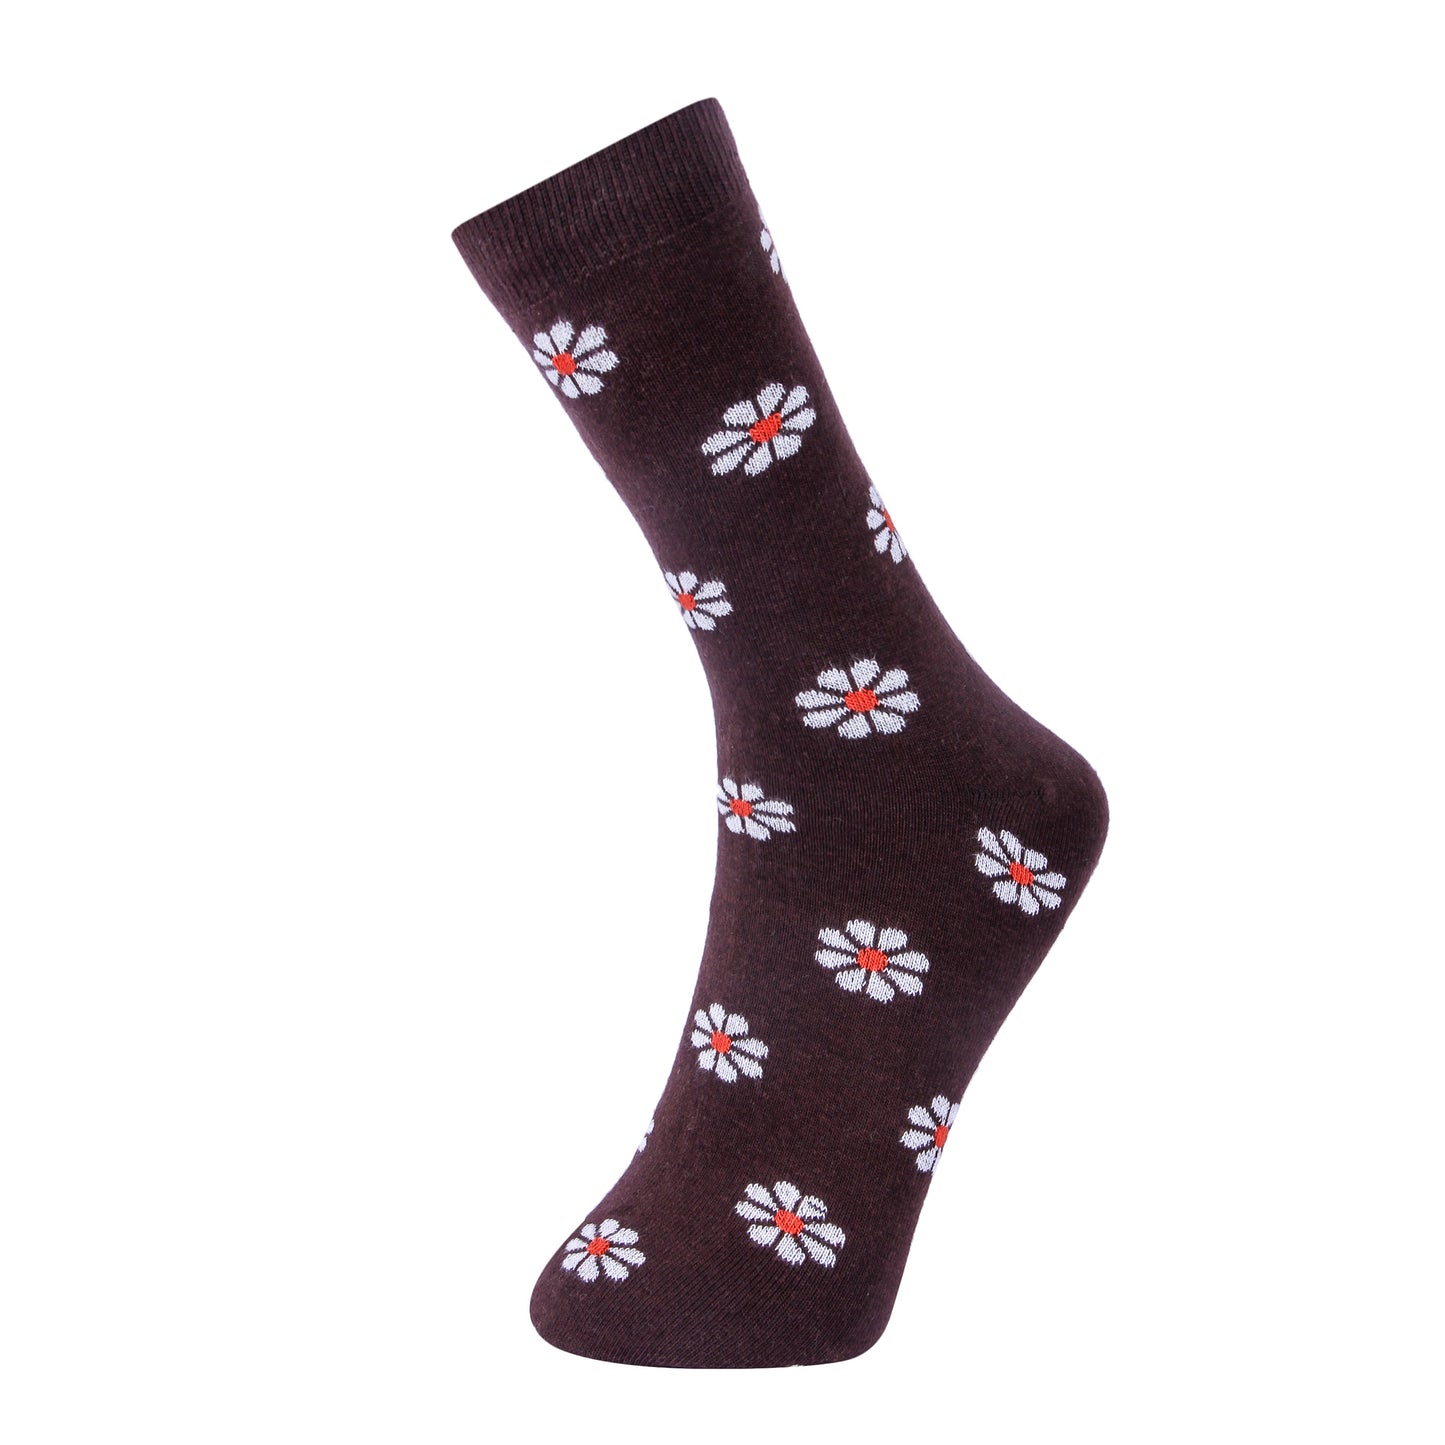 Women's Casual Socks Floral design-Pack of 3pairs